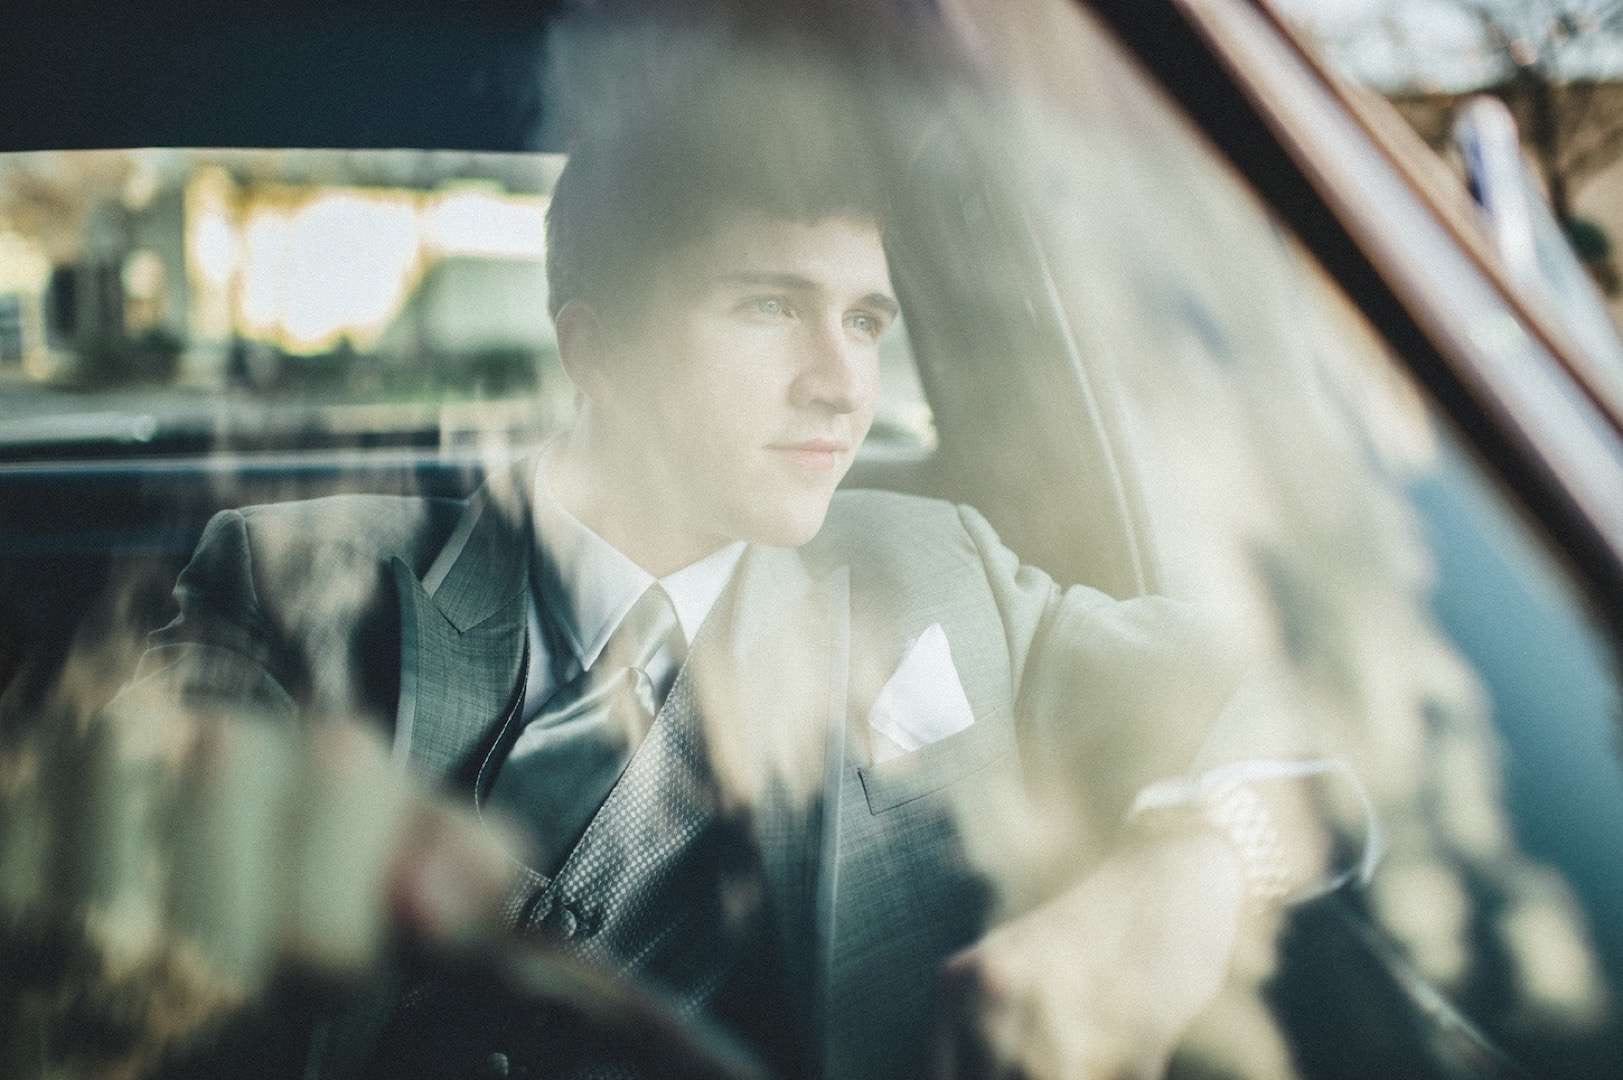 Mens Wearhouse Sprin Lookbook Male model in a gray suit posing for a camera in a car.